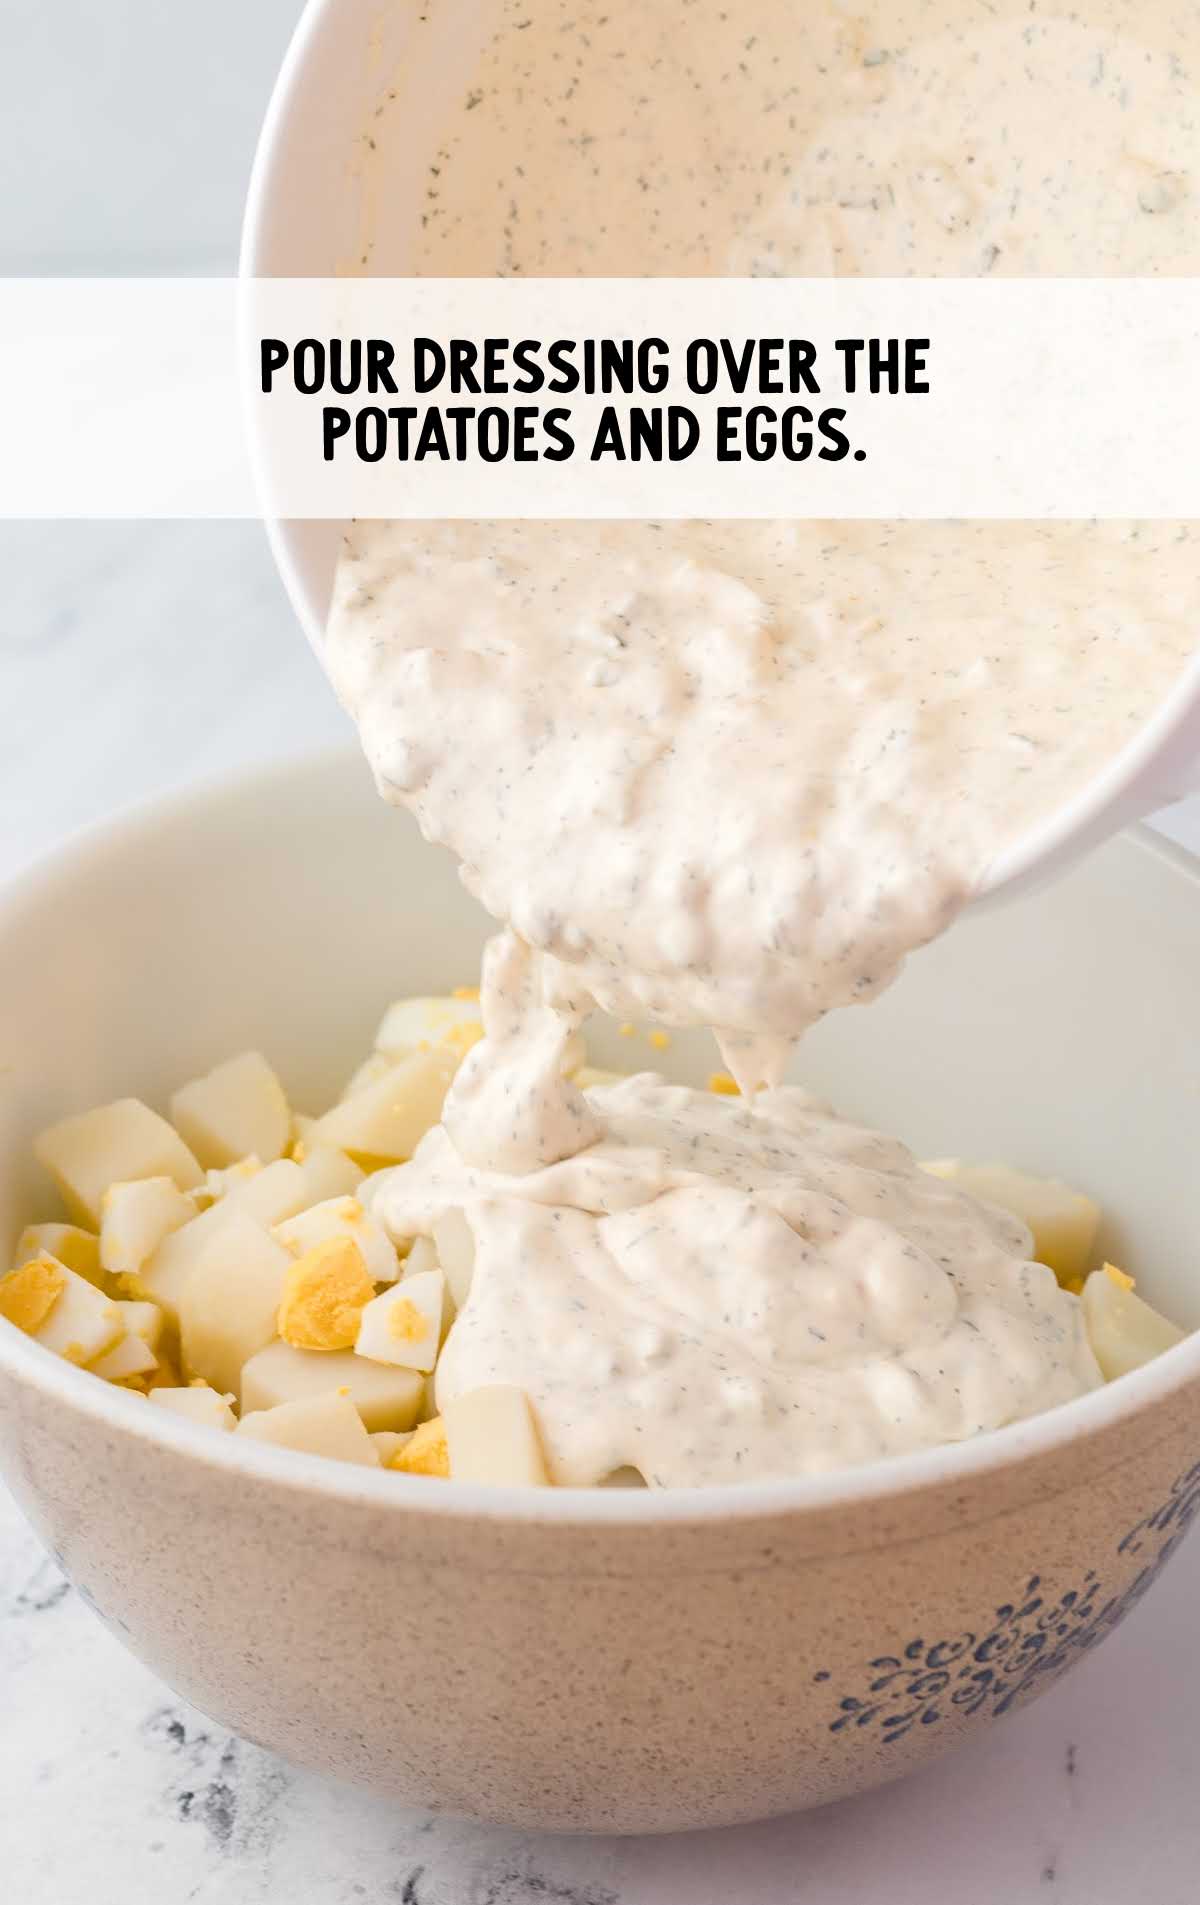 salad dressing poured the potatoes and eggs in a bowl